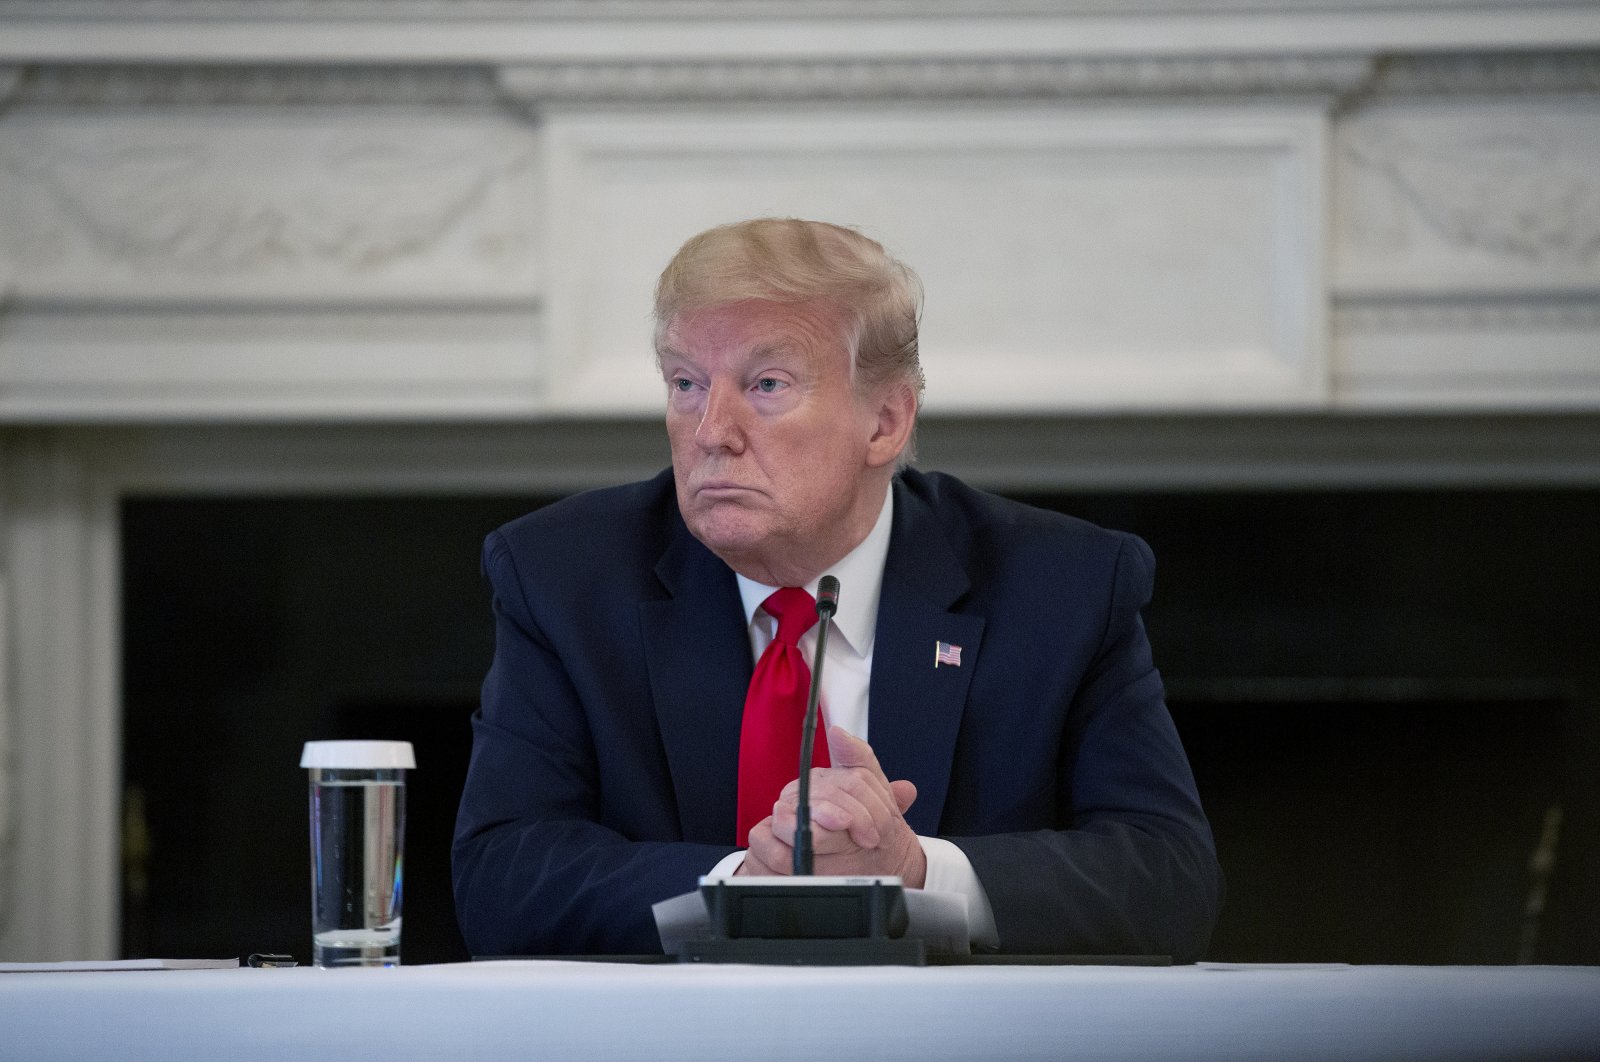 US President Donald J. Trump participates in a roundtable with industry executives on the plan for 'Opening Up America Again' in the State Dining Room of the White House in Washington, DC, USA, 29 April 2020. (EPA Photo)